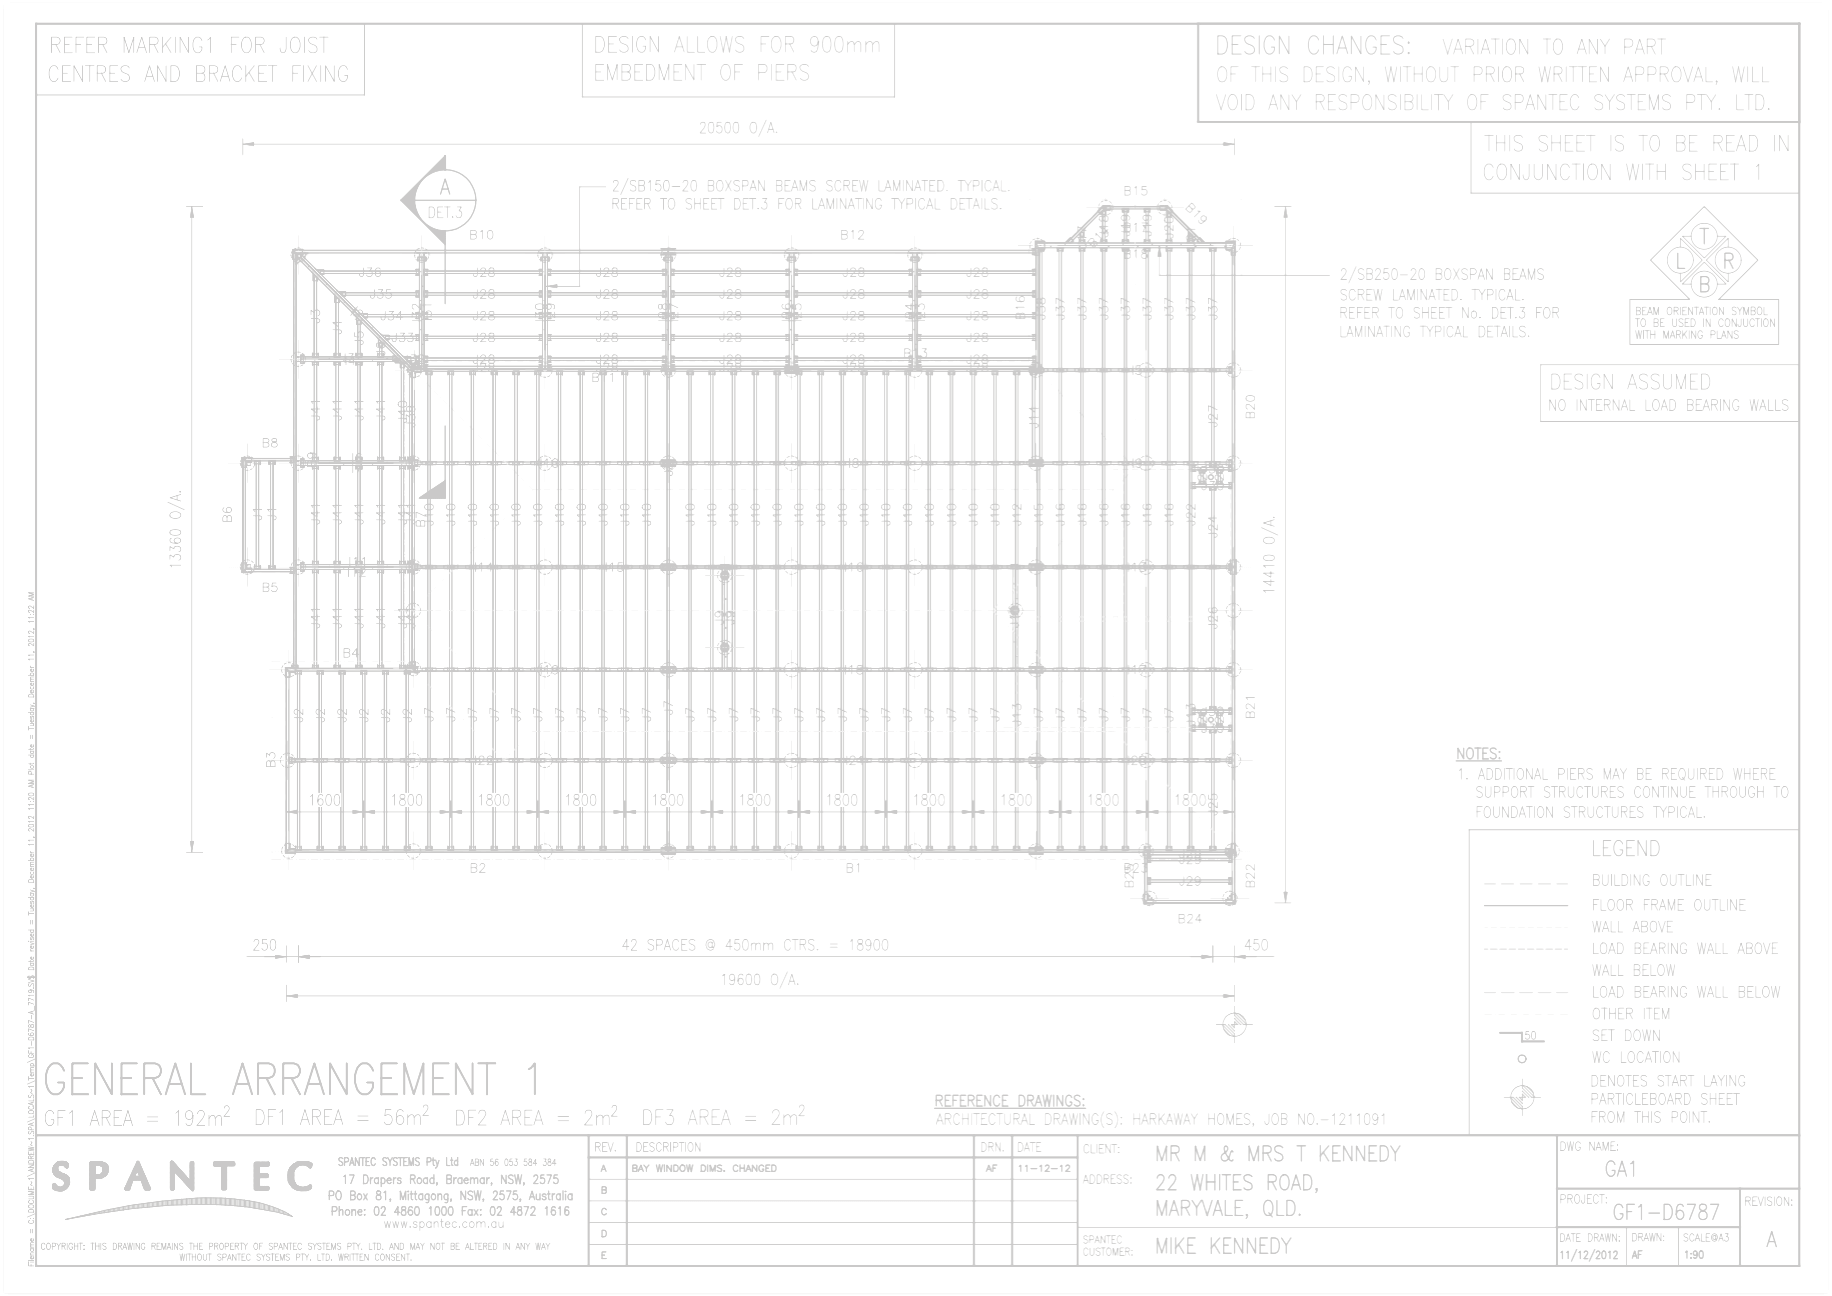 Example of a General Arrangement drawing for residential floor framing